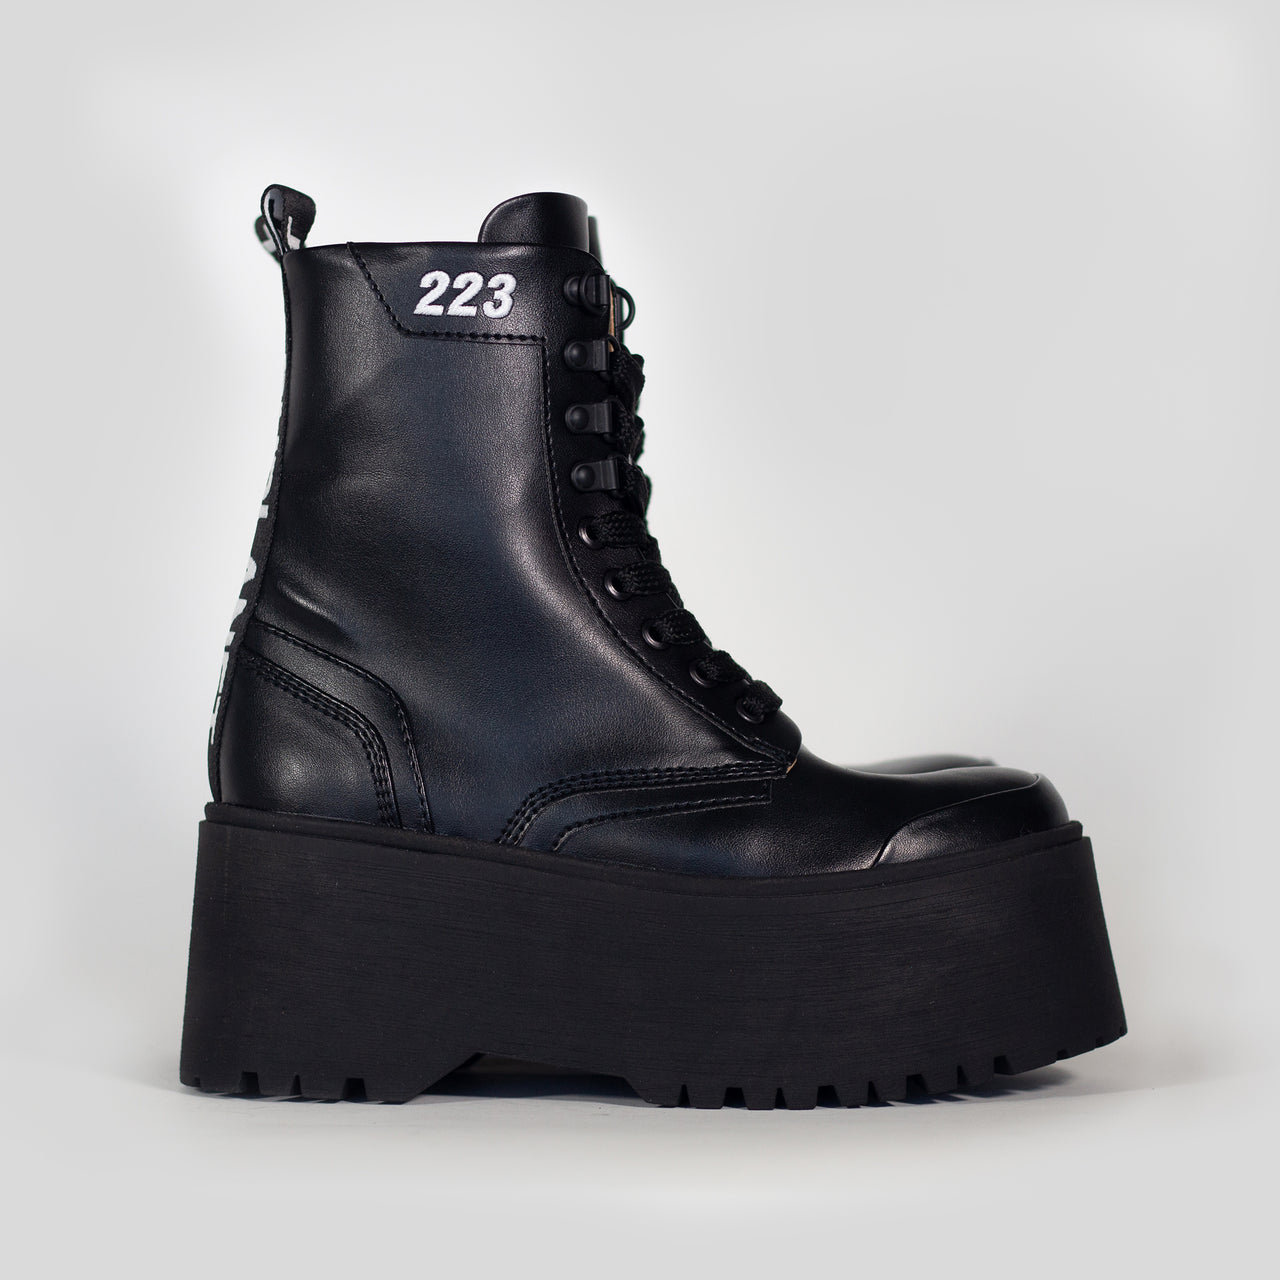 RIOT! BOOT 223 "ONYX"